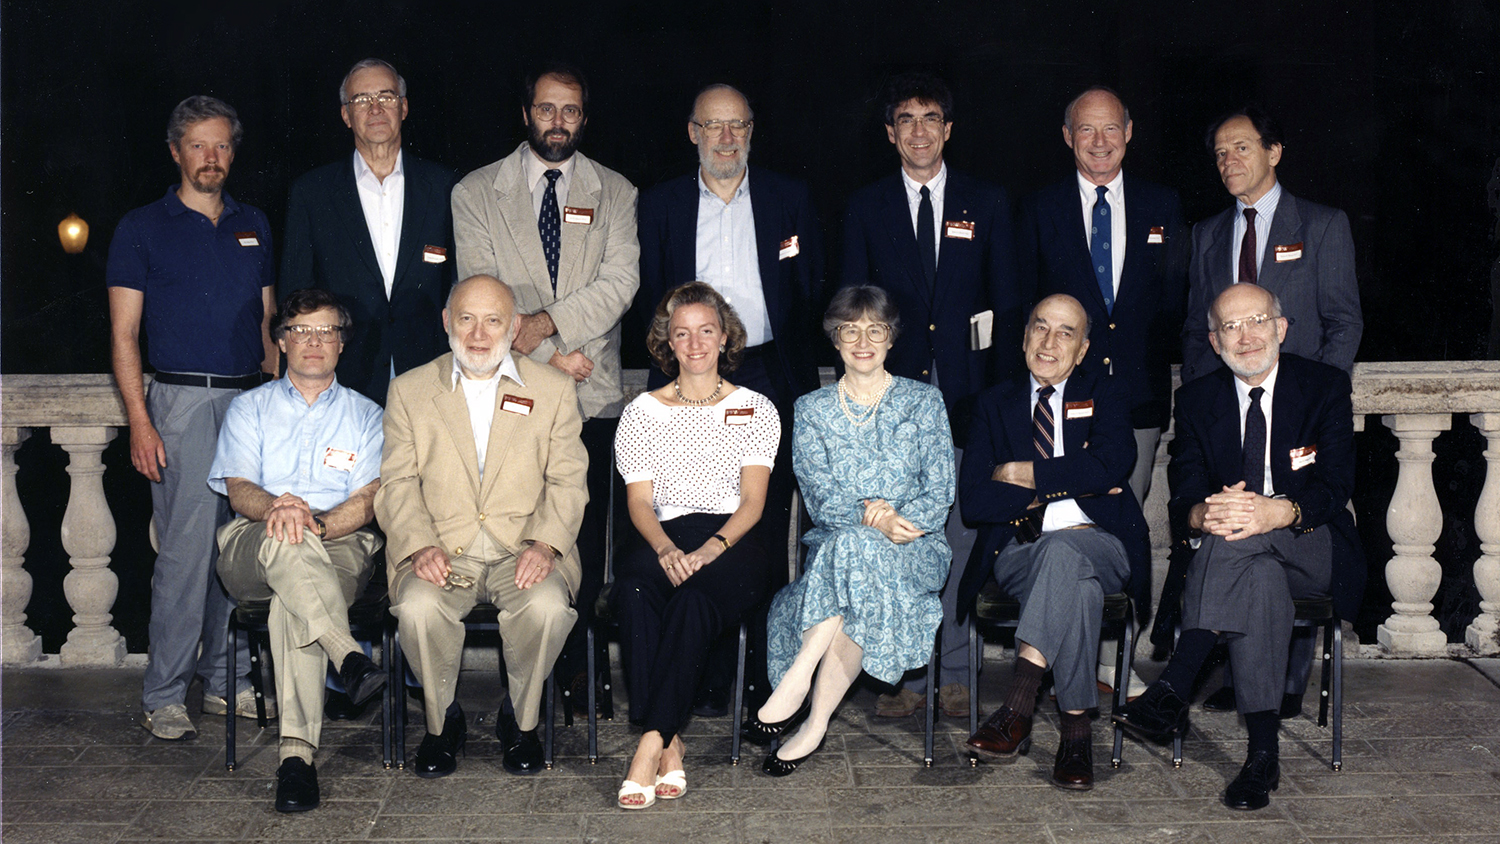 Members of the scholars National Advisory Committee at the 1990 meeting in Coral Gables, Florida.